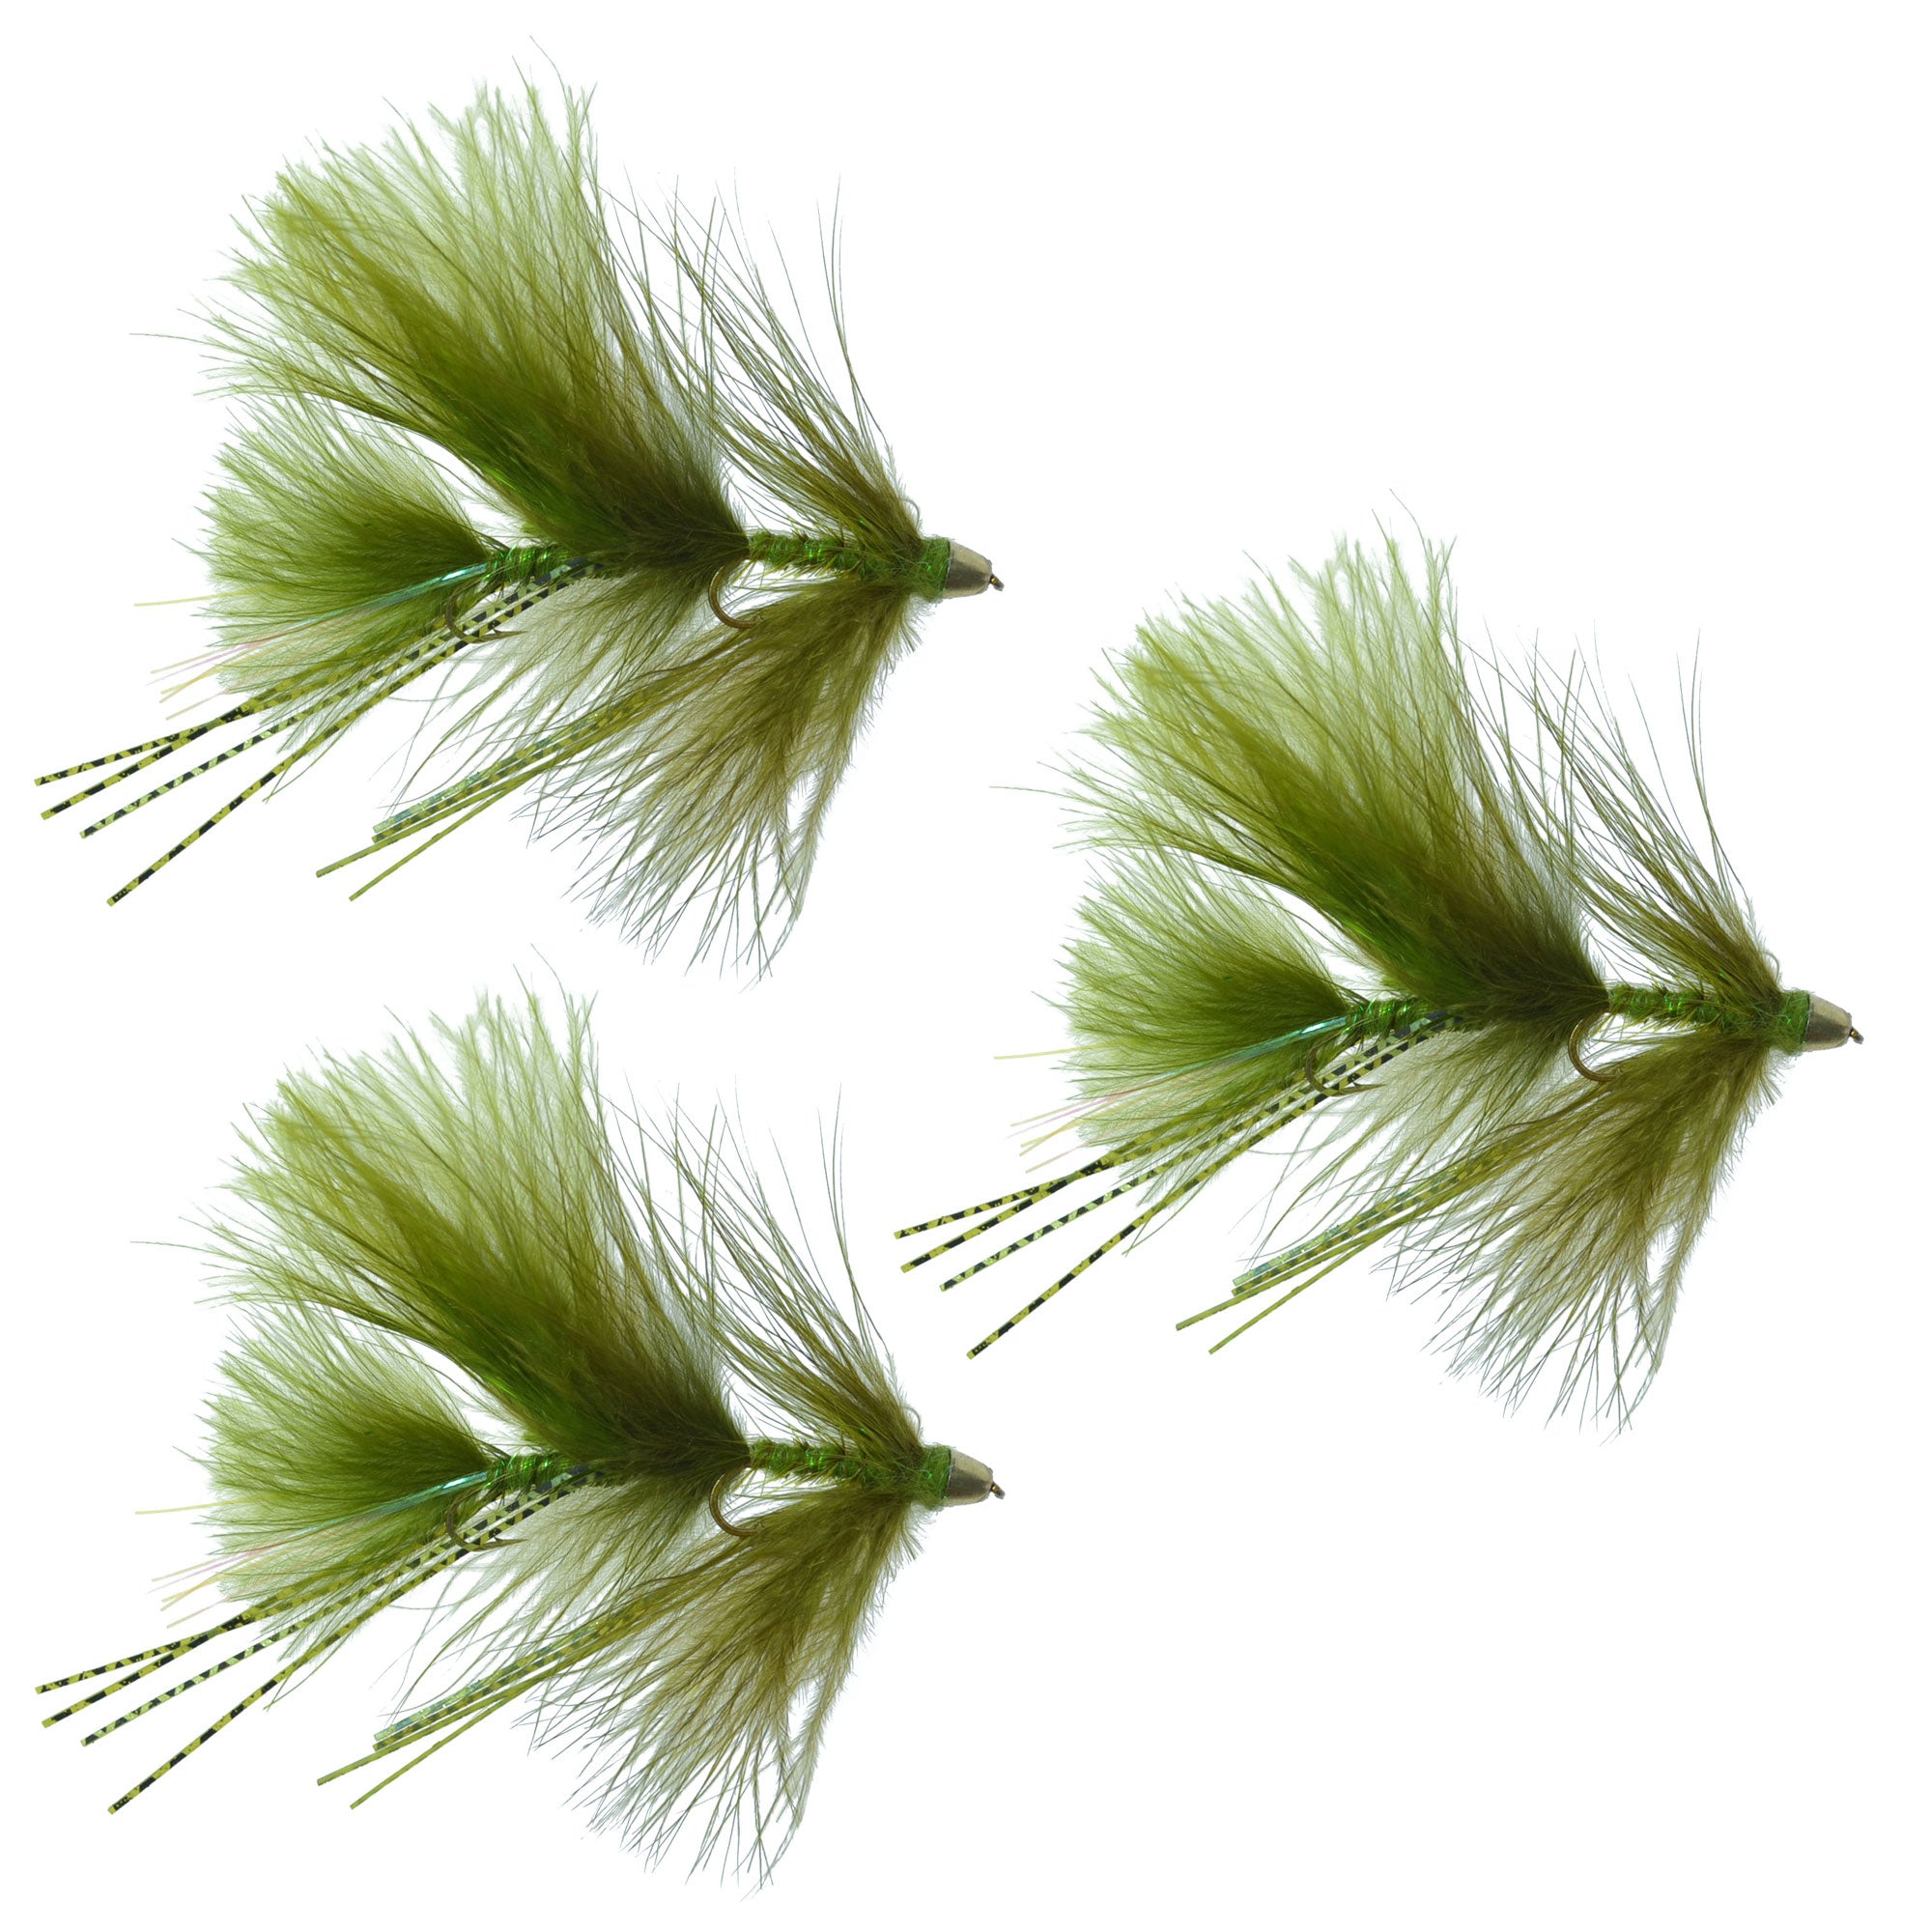 Circus Peanut Envy Streamer Olive - Size 6 - Articulated Fishing Flies - Set of 3